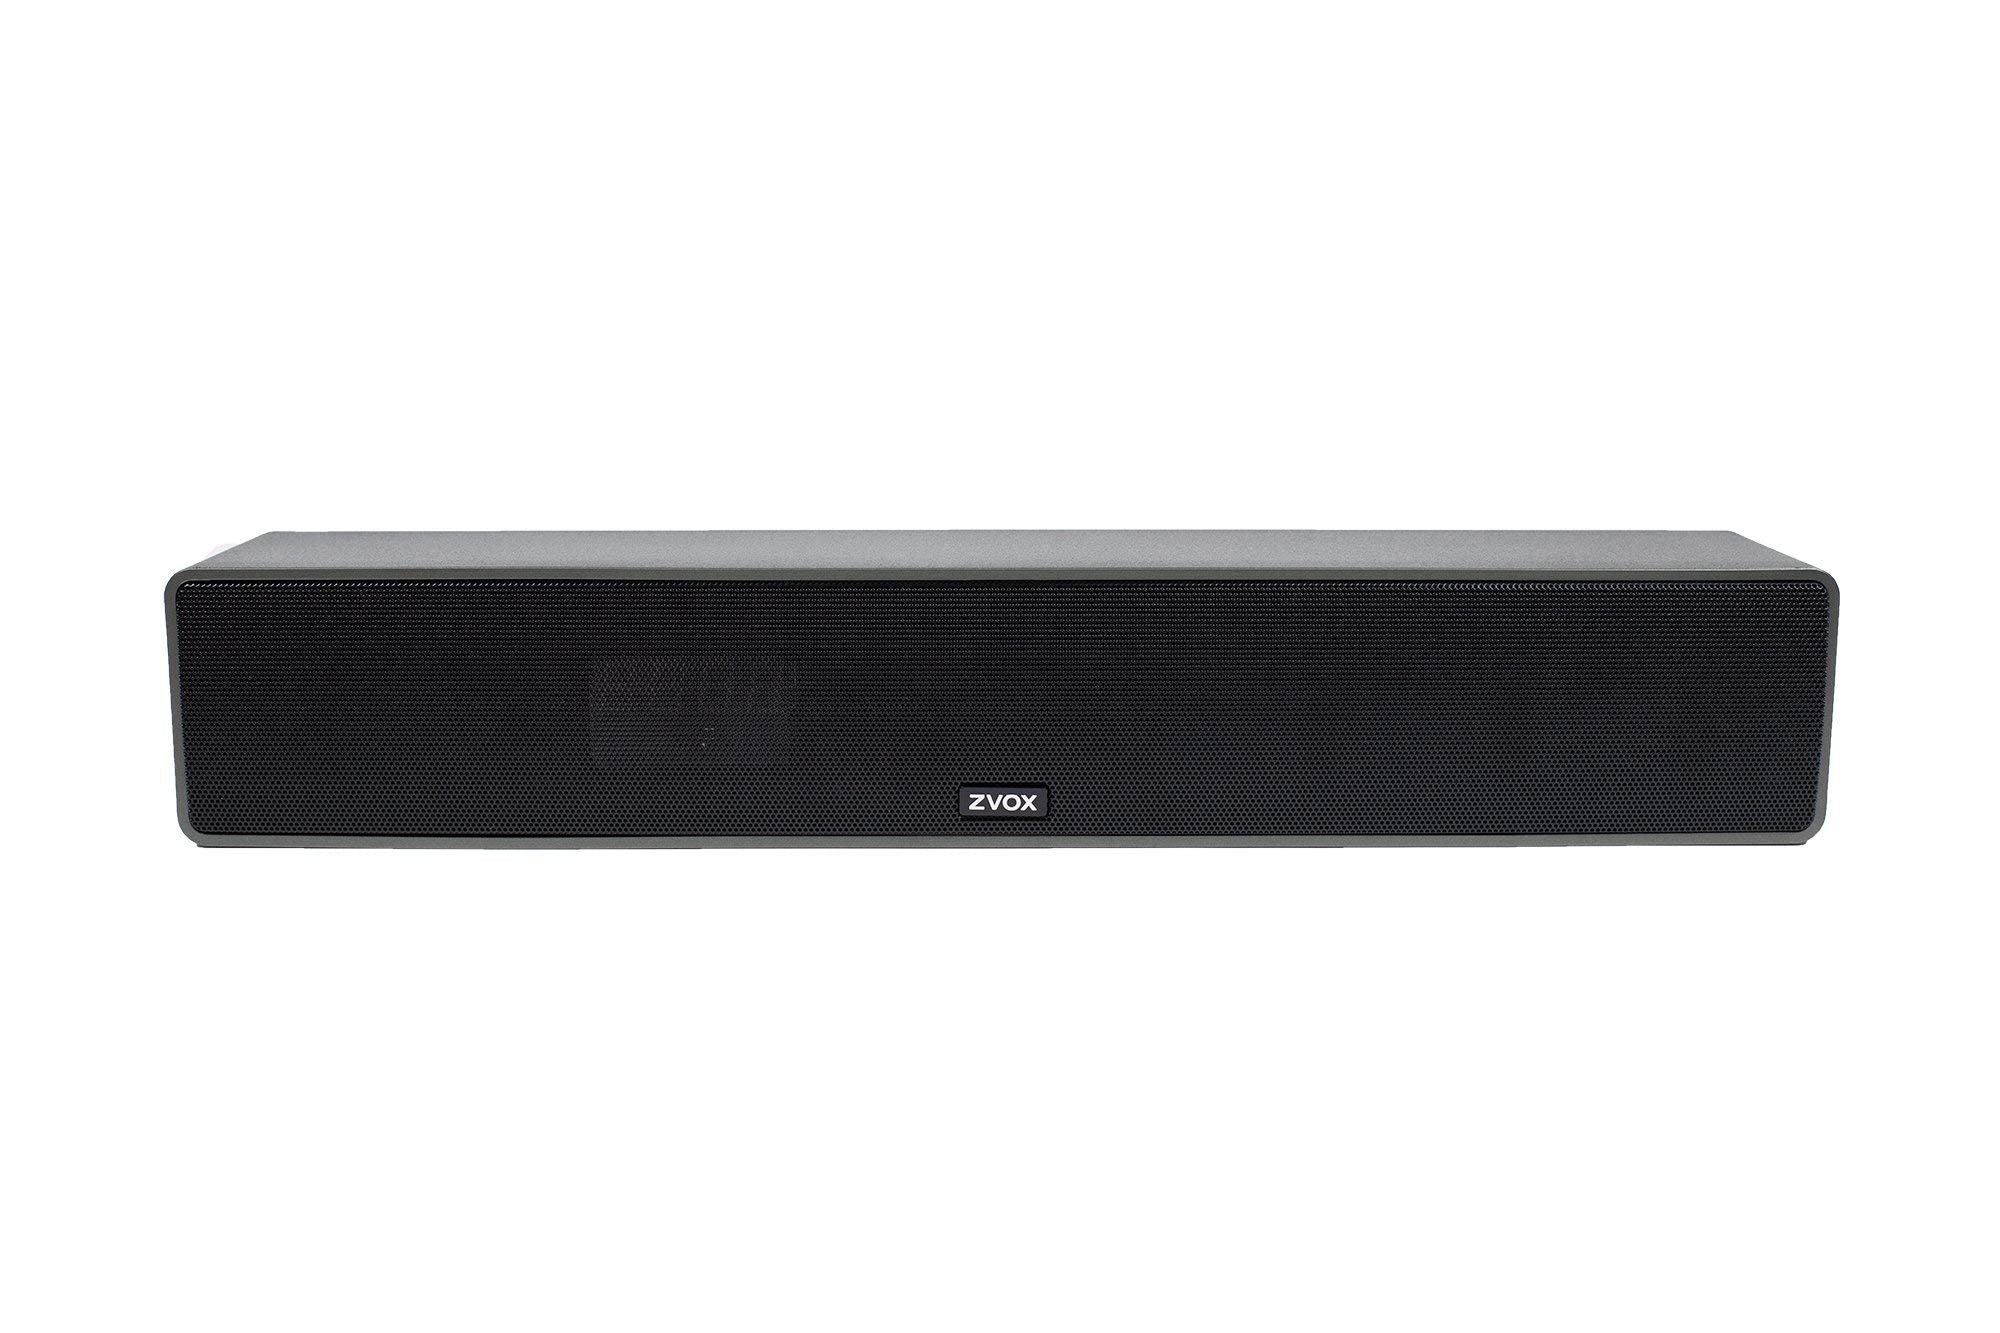 ZVOX Dialogue Clarifying Sound Bar with Patented Hearing Technology, Twelve Levels of Voice Boost - 30-Day Home Trial - AccuVoice AV157 TV Speaker (Black)